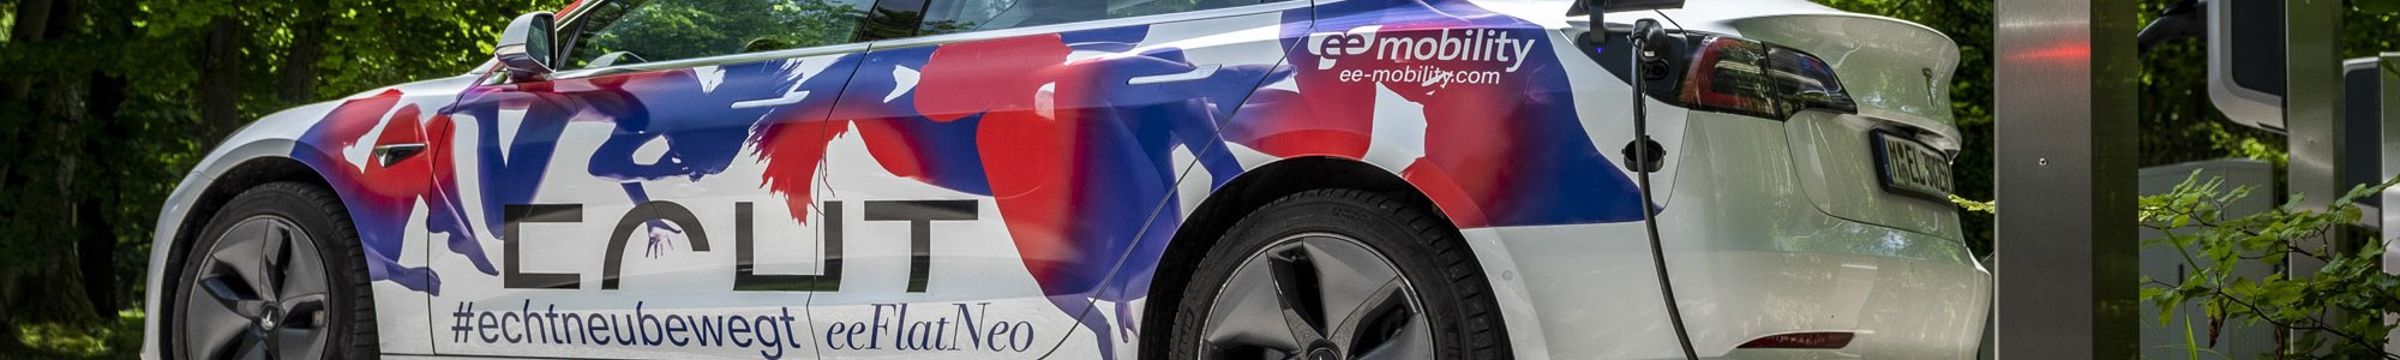 eeMobility branded electric carV 